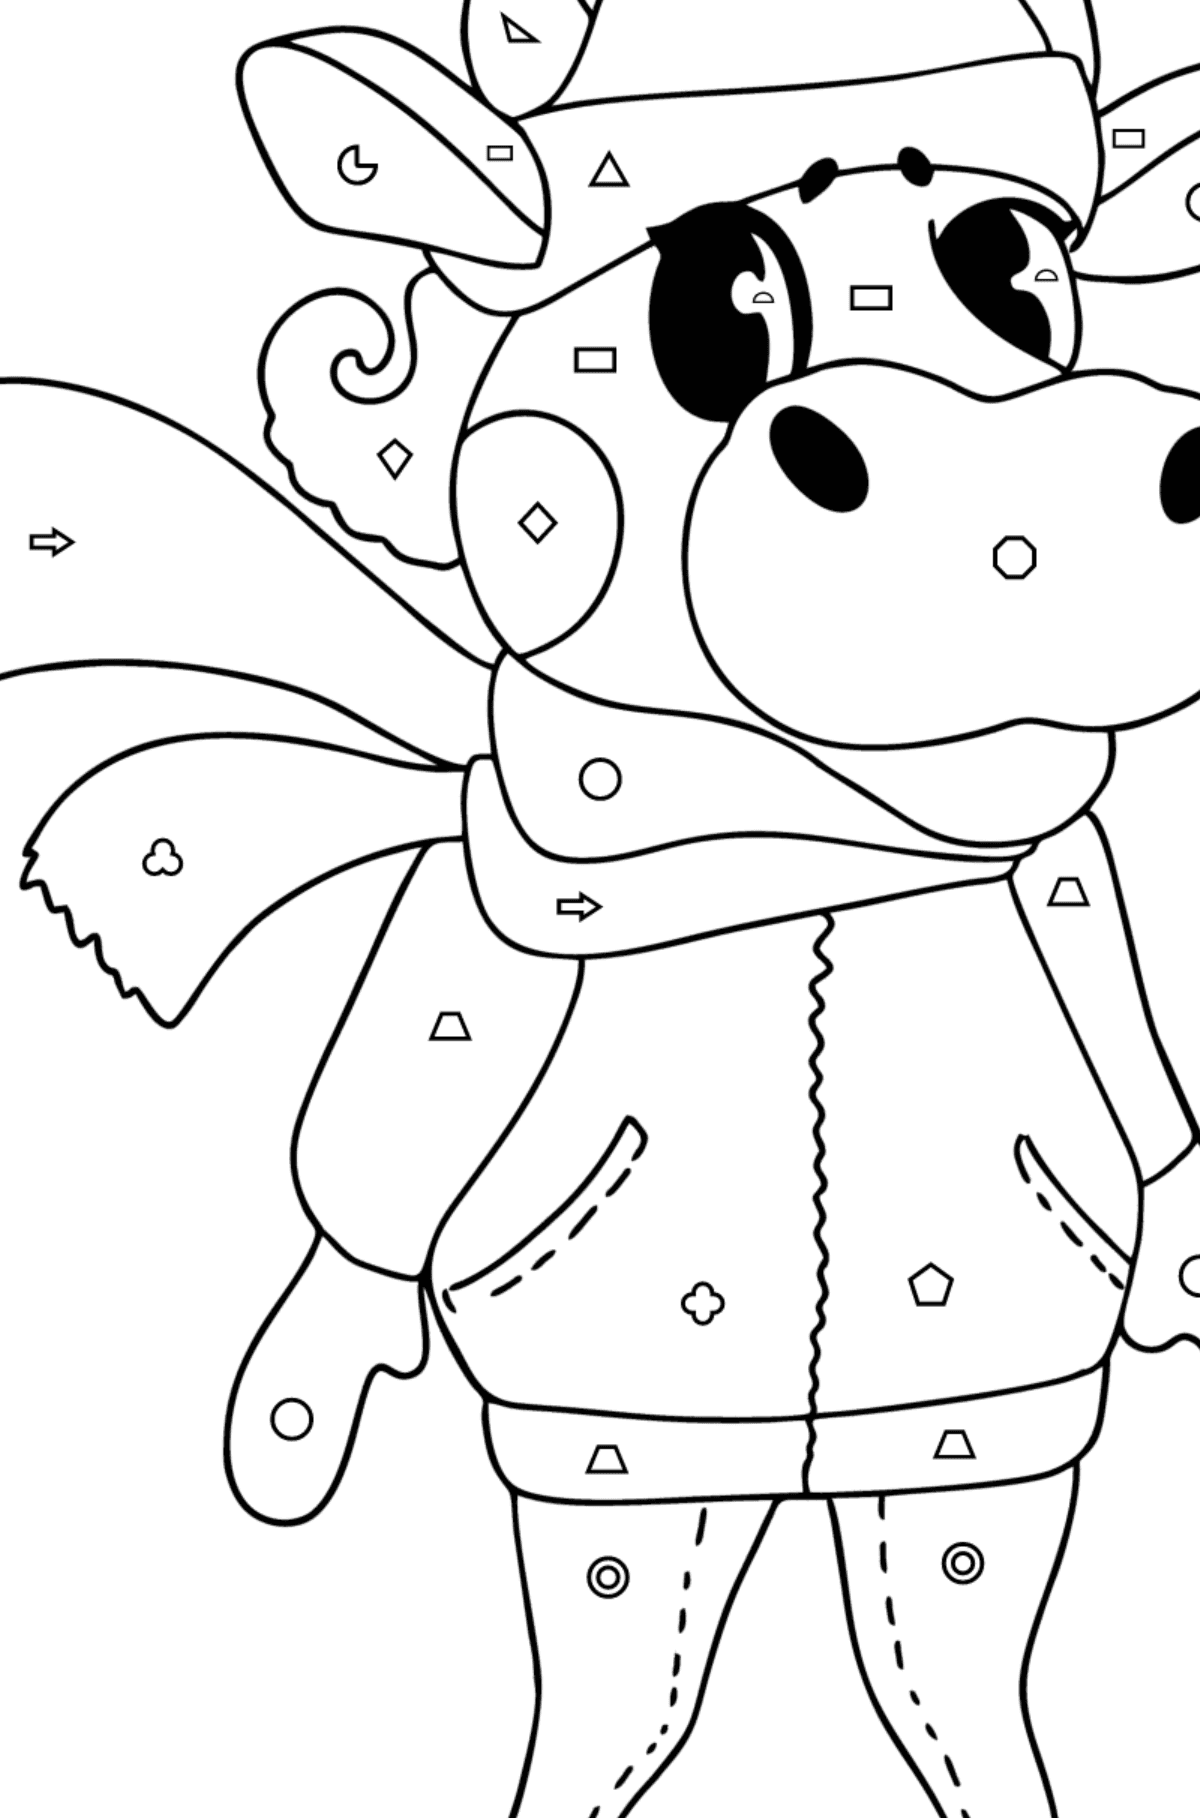 Kawaii cow coloring page - Coloring by Geometric Shapes for Kids